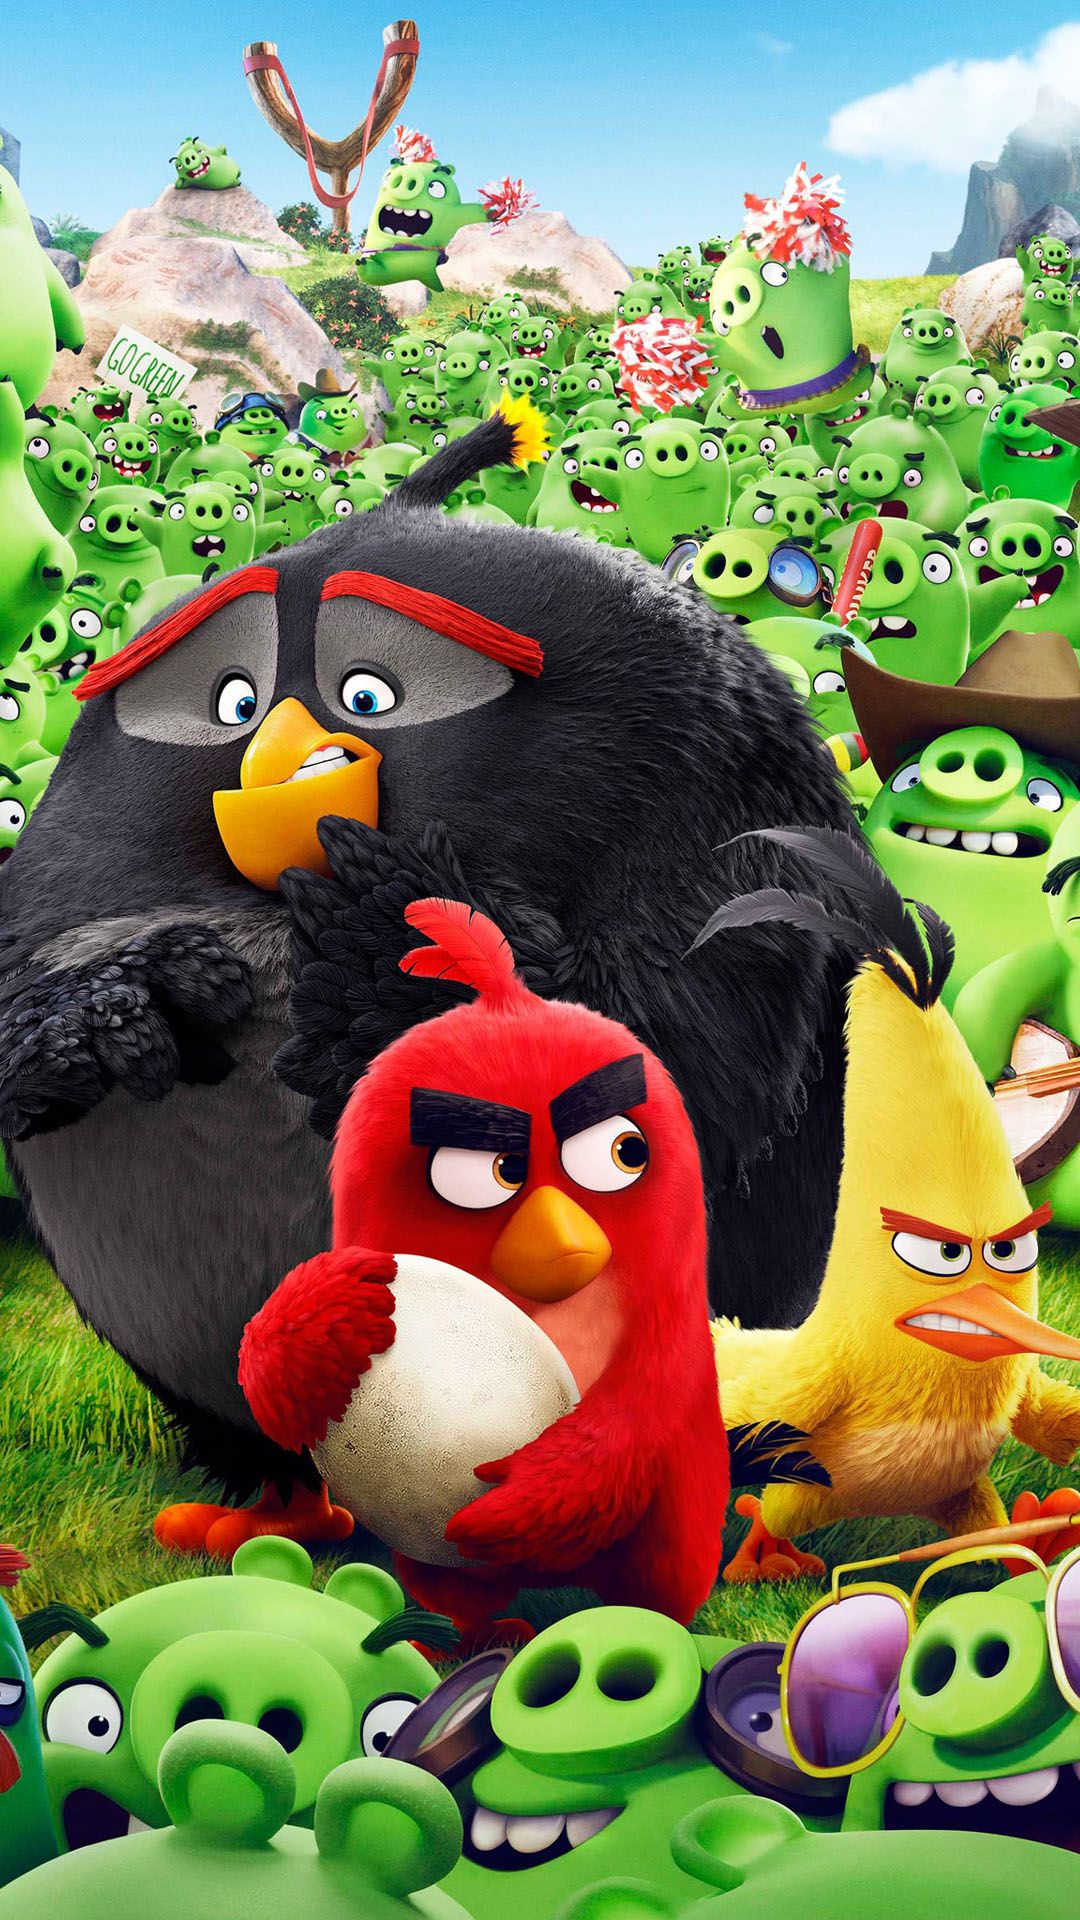 Angry Birds Animation Movie wallpaper free download